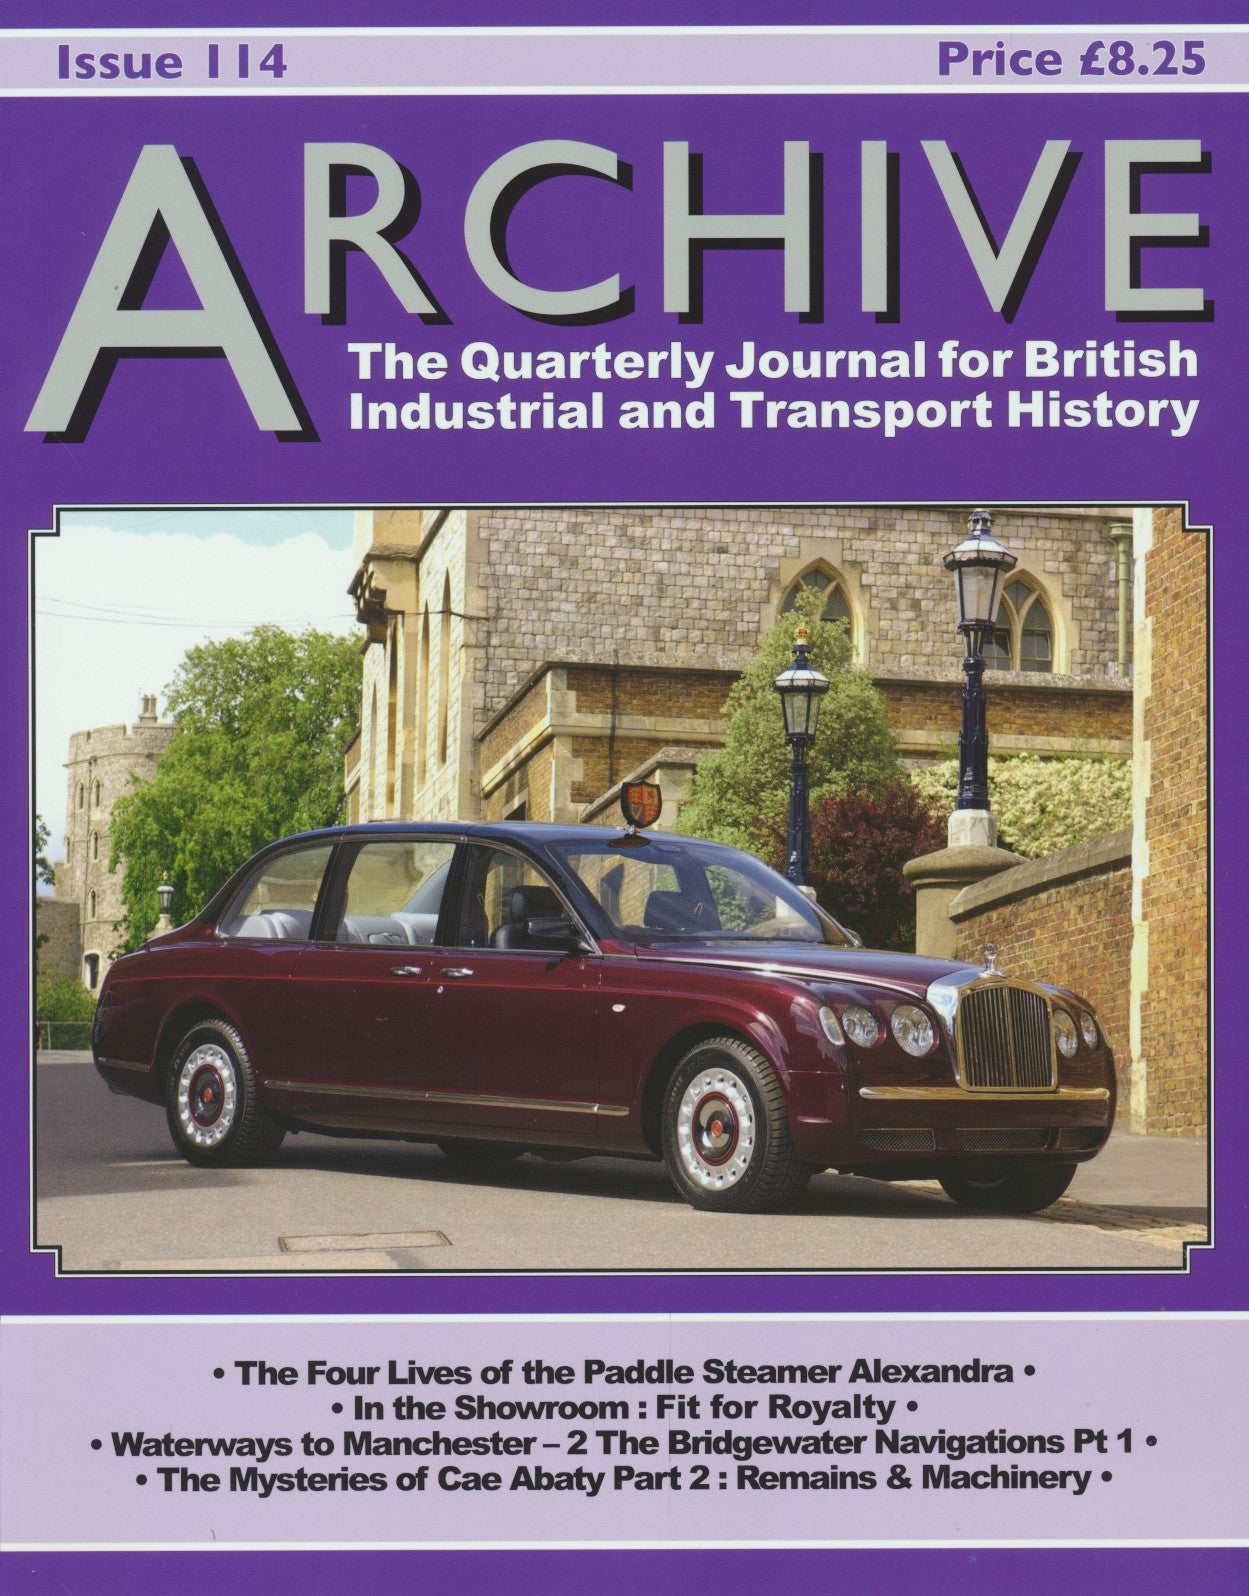 Archive Issue 114